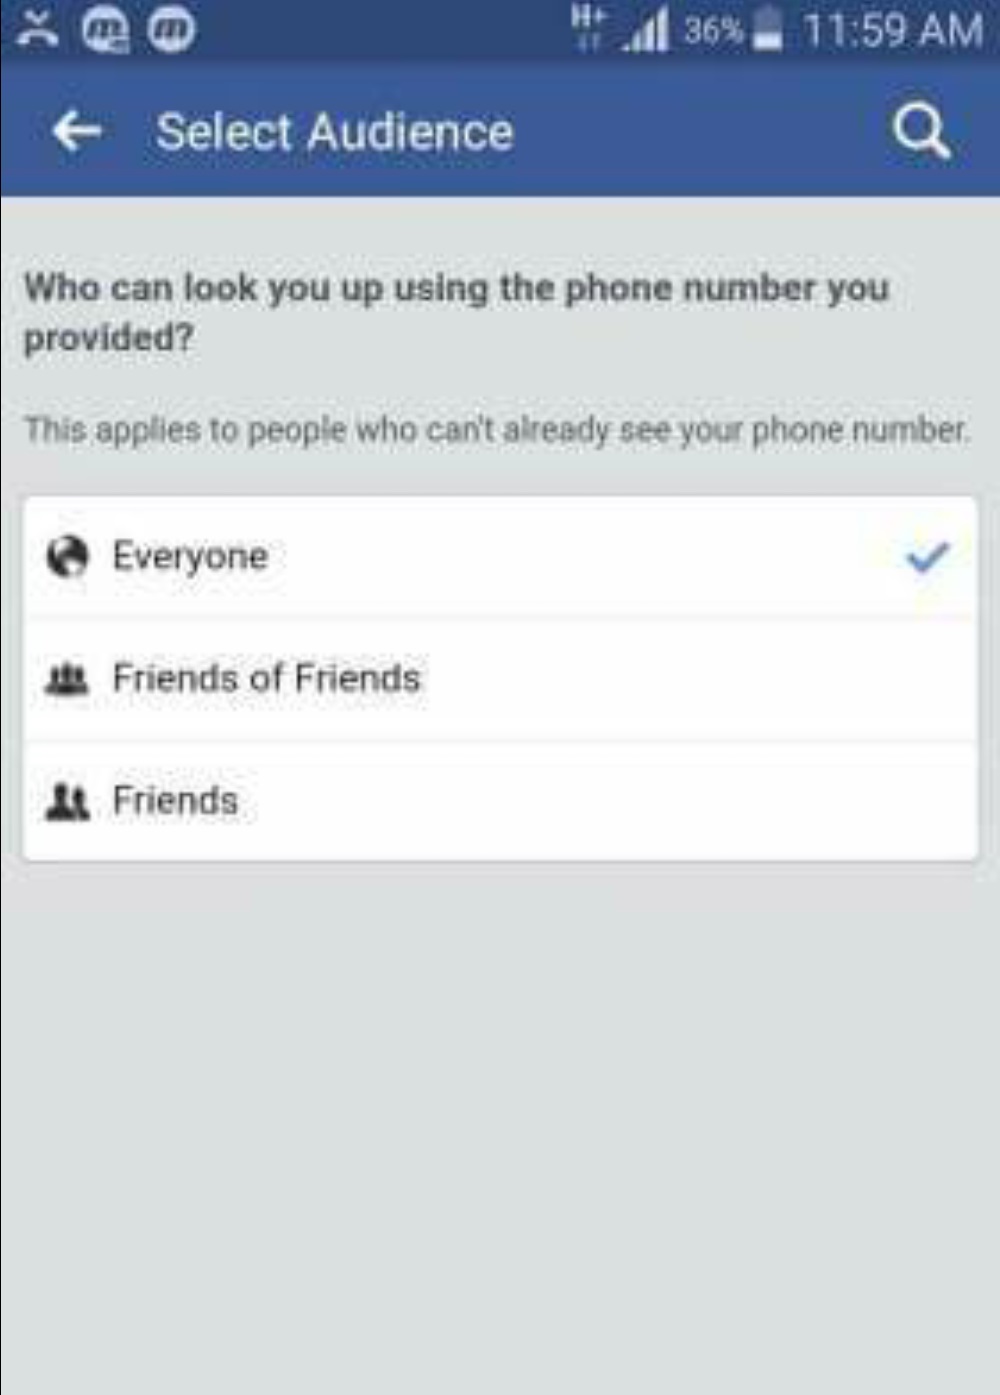 You can choose the right option to set who can find you on Facebook by using the phone number and email address you provided.